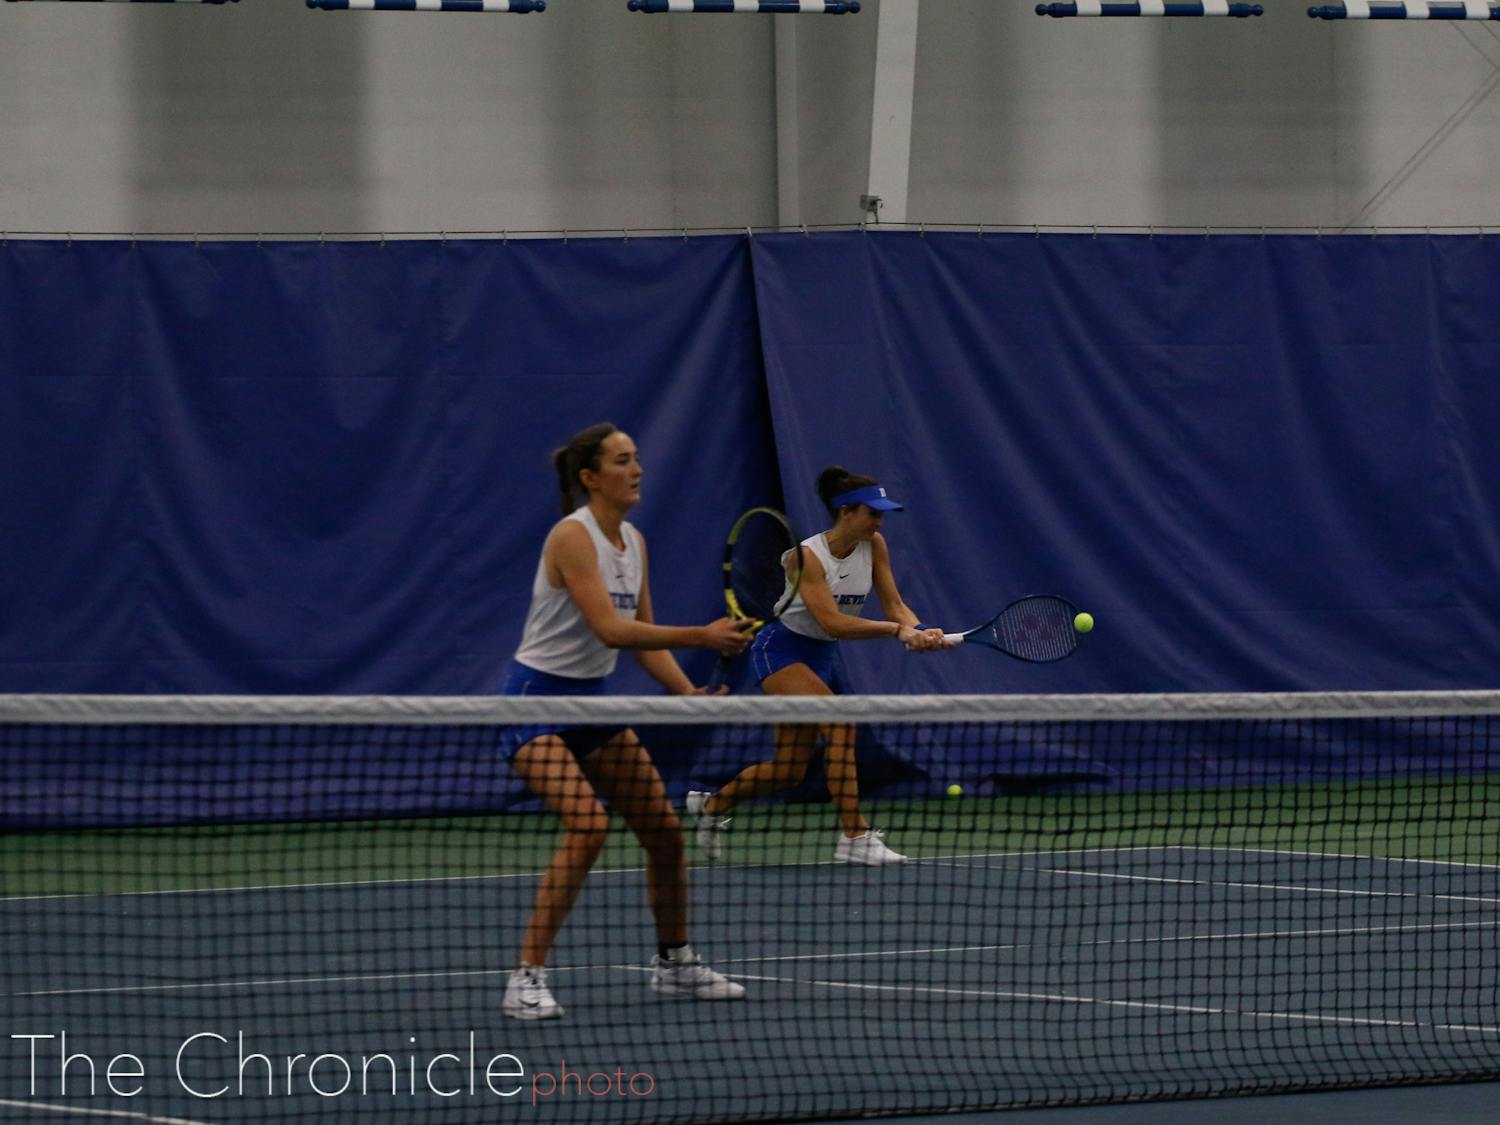 Duke won both its individual matches over the weekend to start the season off undefeated.